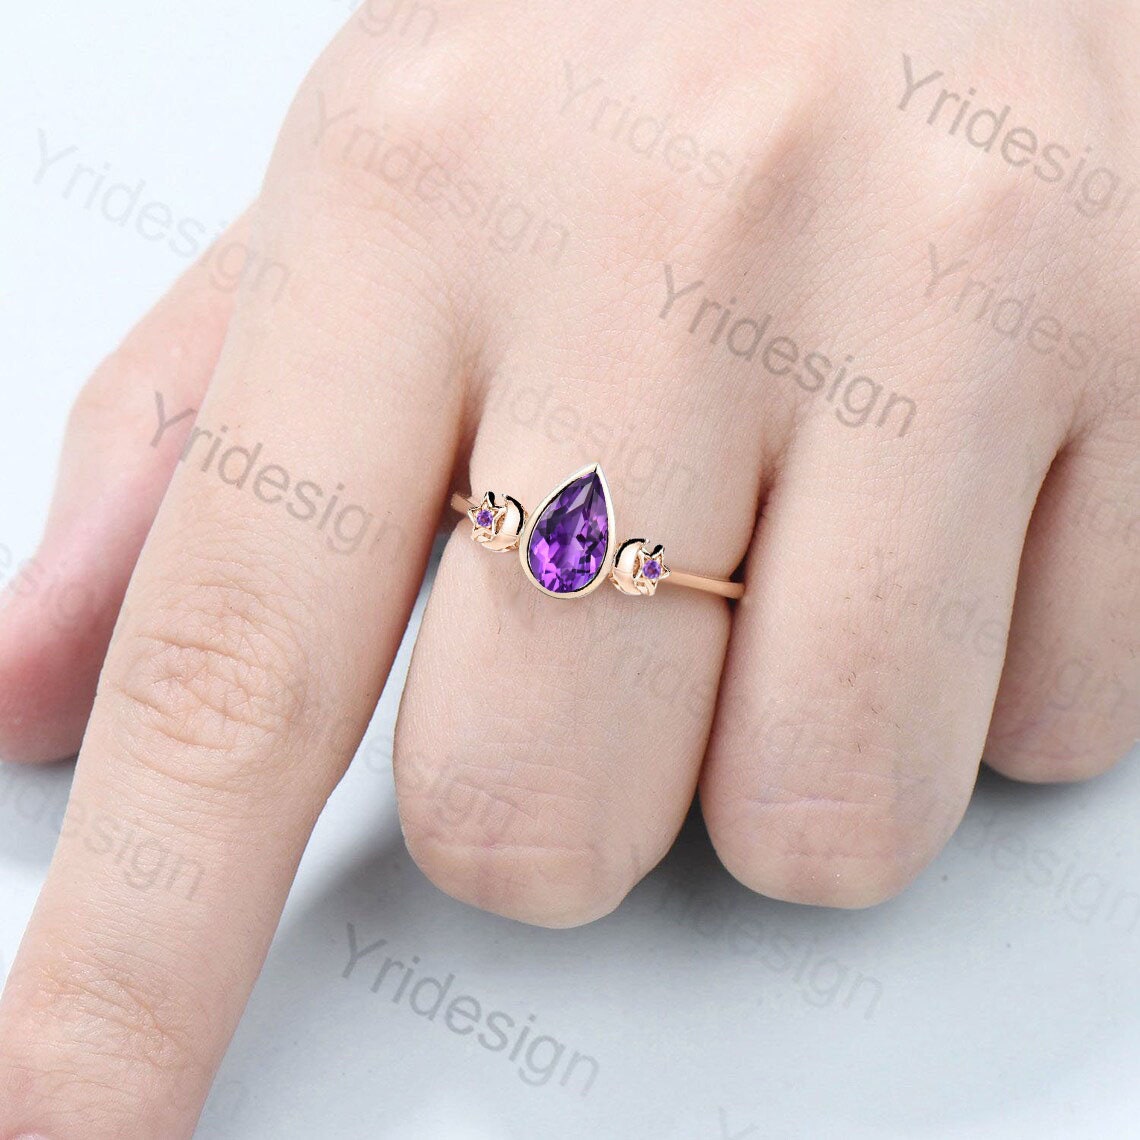 Vintage Pear Shaped Amethyst Engagement Ring Unique moon star bezel set purple crystal silver rose gold wedding ring for women birthday gift - PENFINE